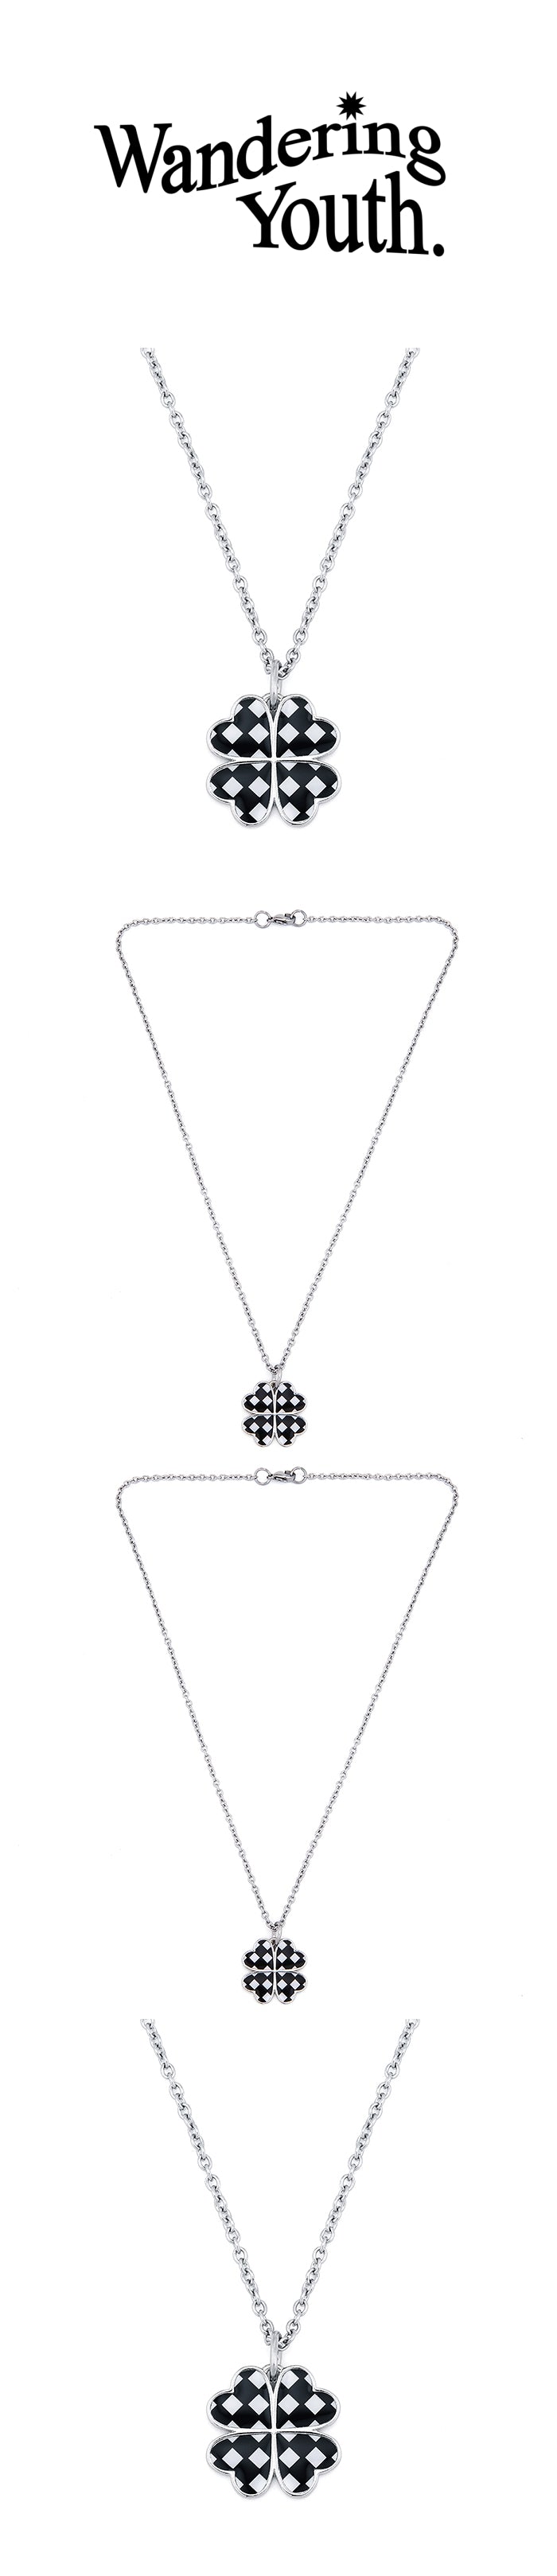 Wandering Youth X Radicix Checkerboard Clover Necklace